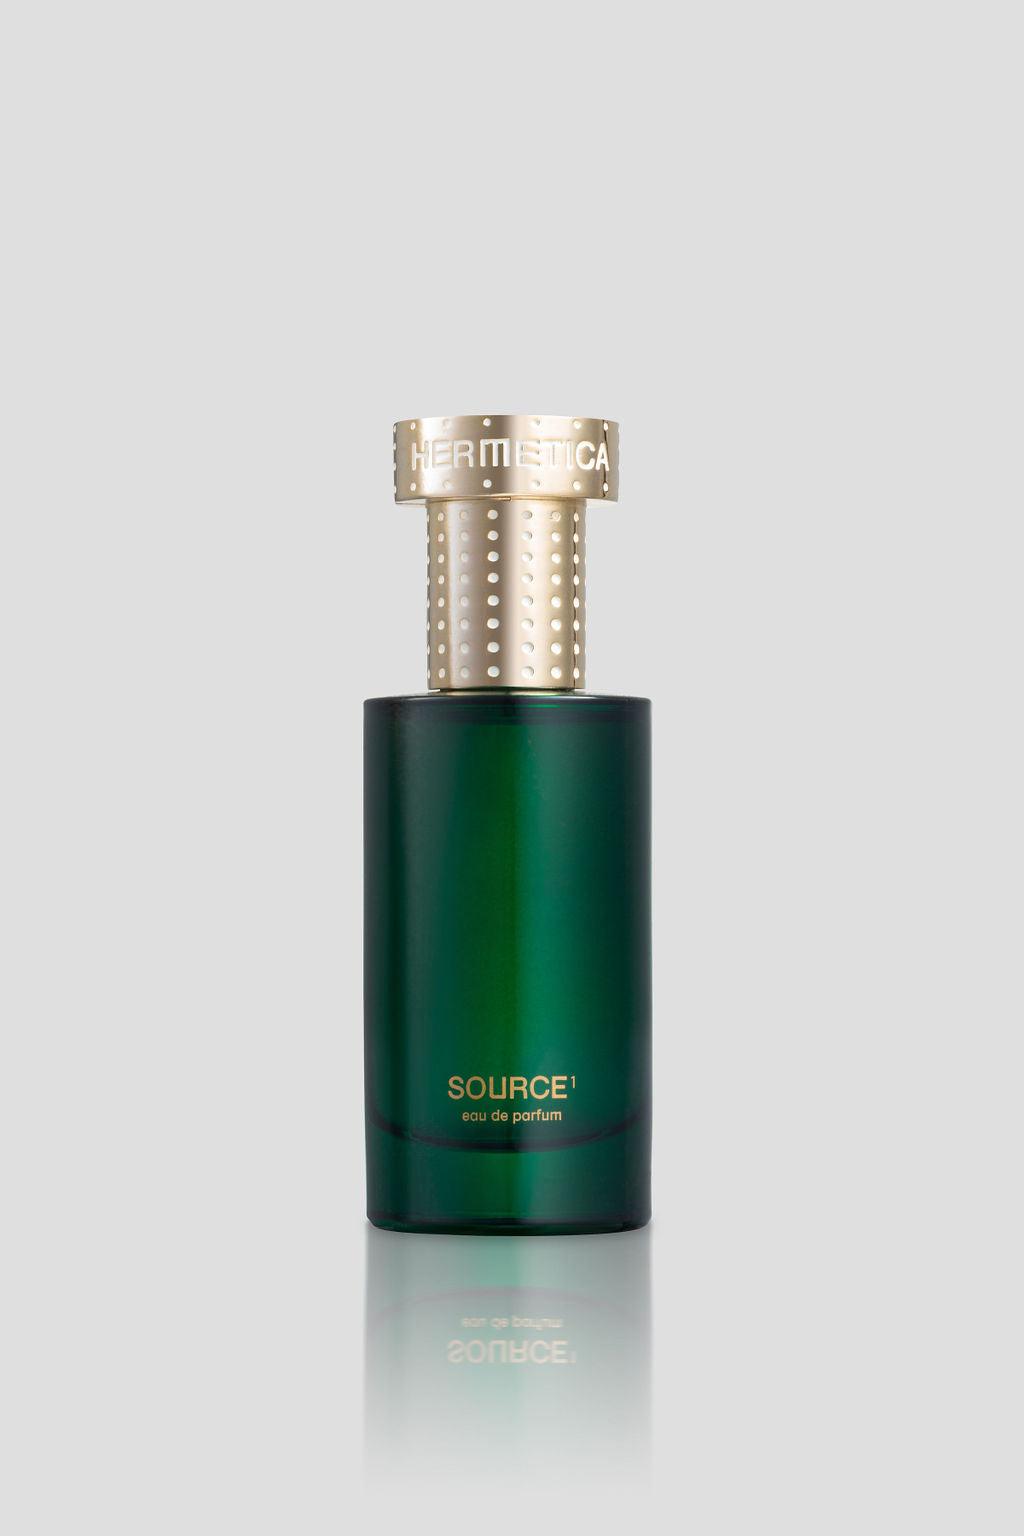 SOURCE1 - SCENT BEAUTY